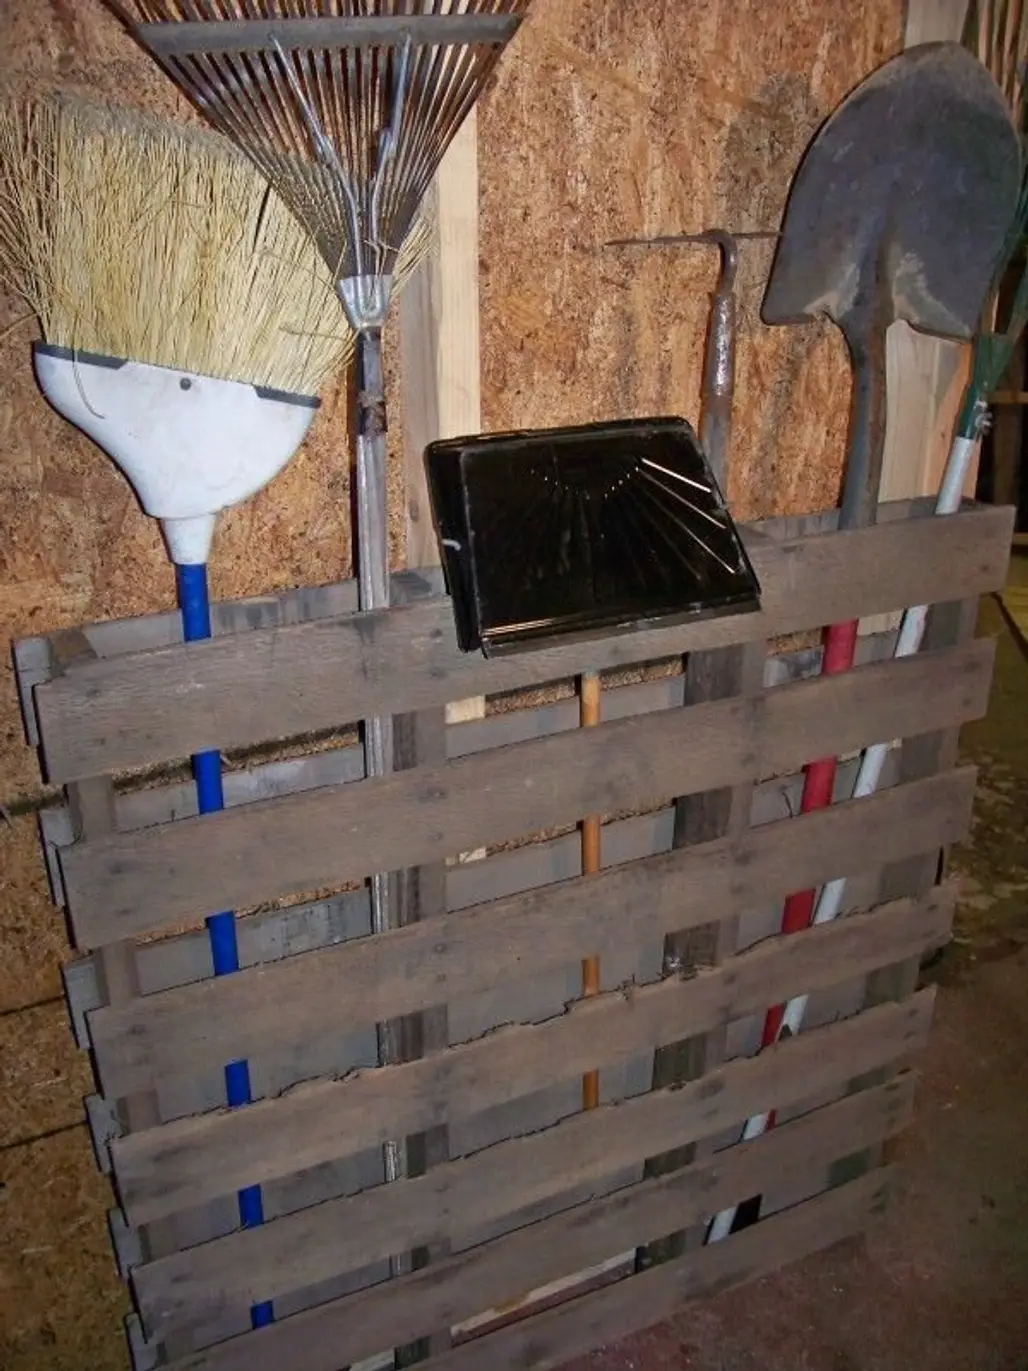 Organize Garden Tools by Using a Pallet